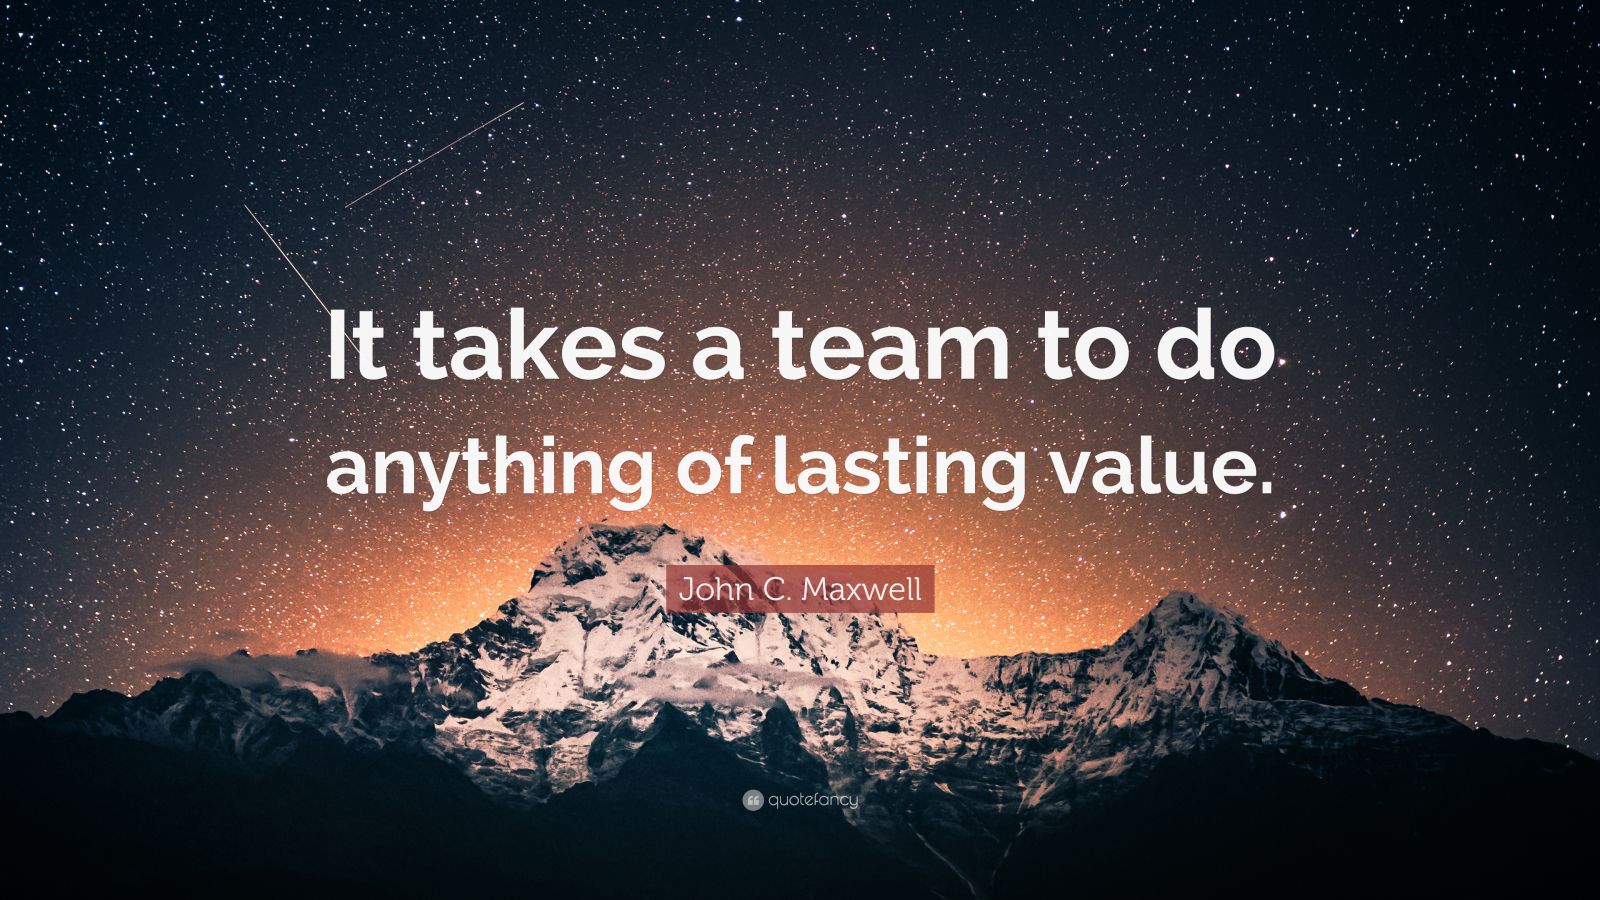 John C. Maxwell Quote: “It takes a team to do anything of lasting value ...